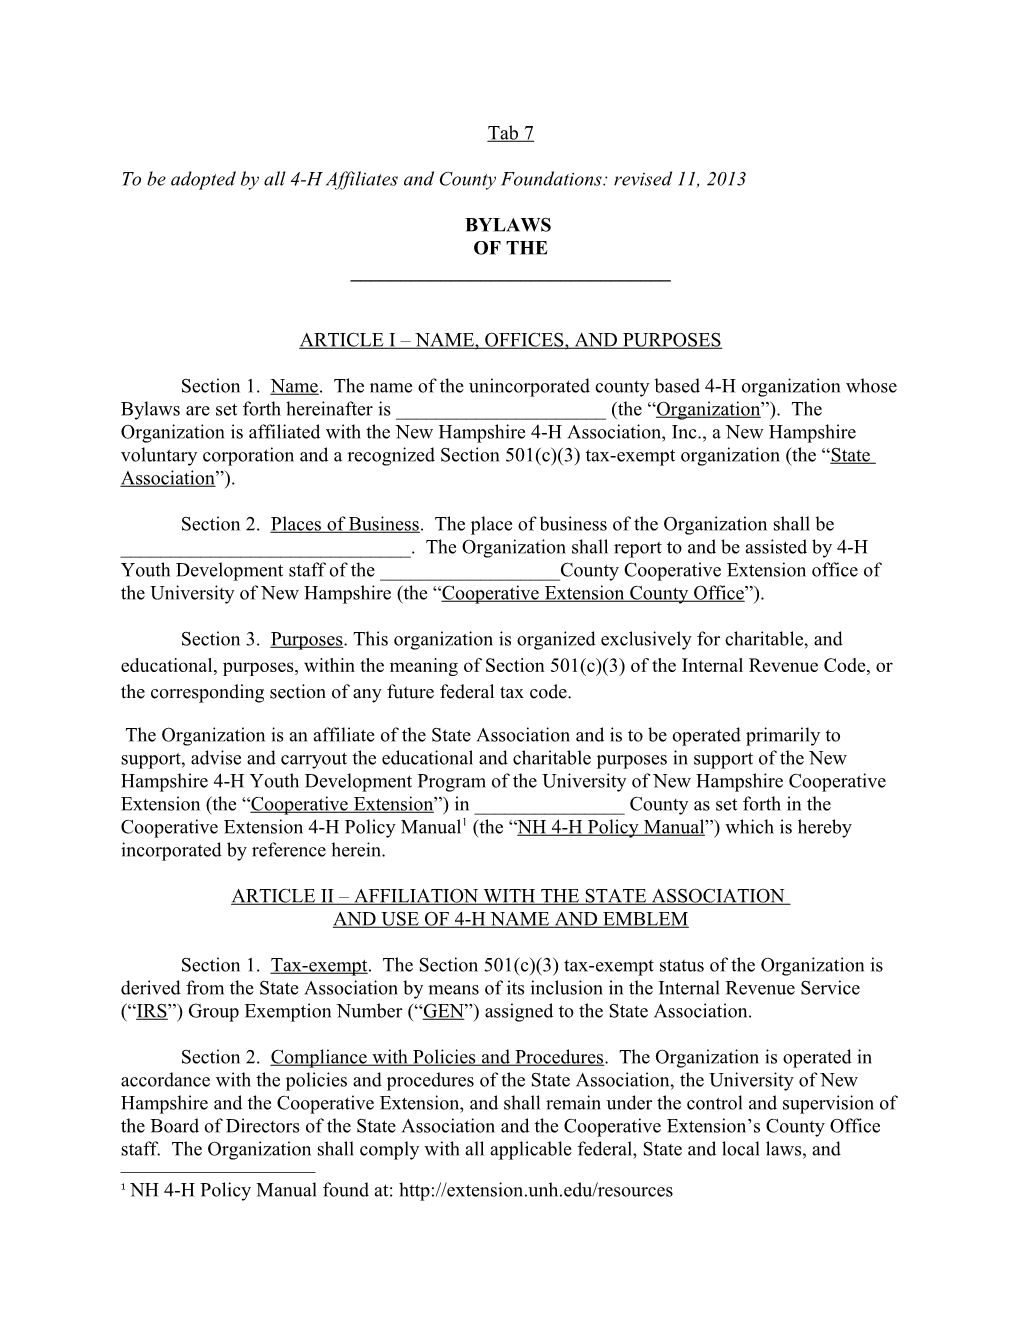 Tab 7 - Sample Bylaws for 4-H Affiliates/County Foundations (M2045483;1)